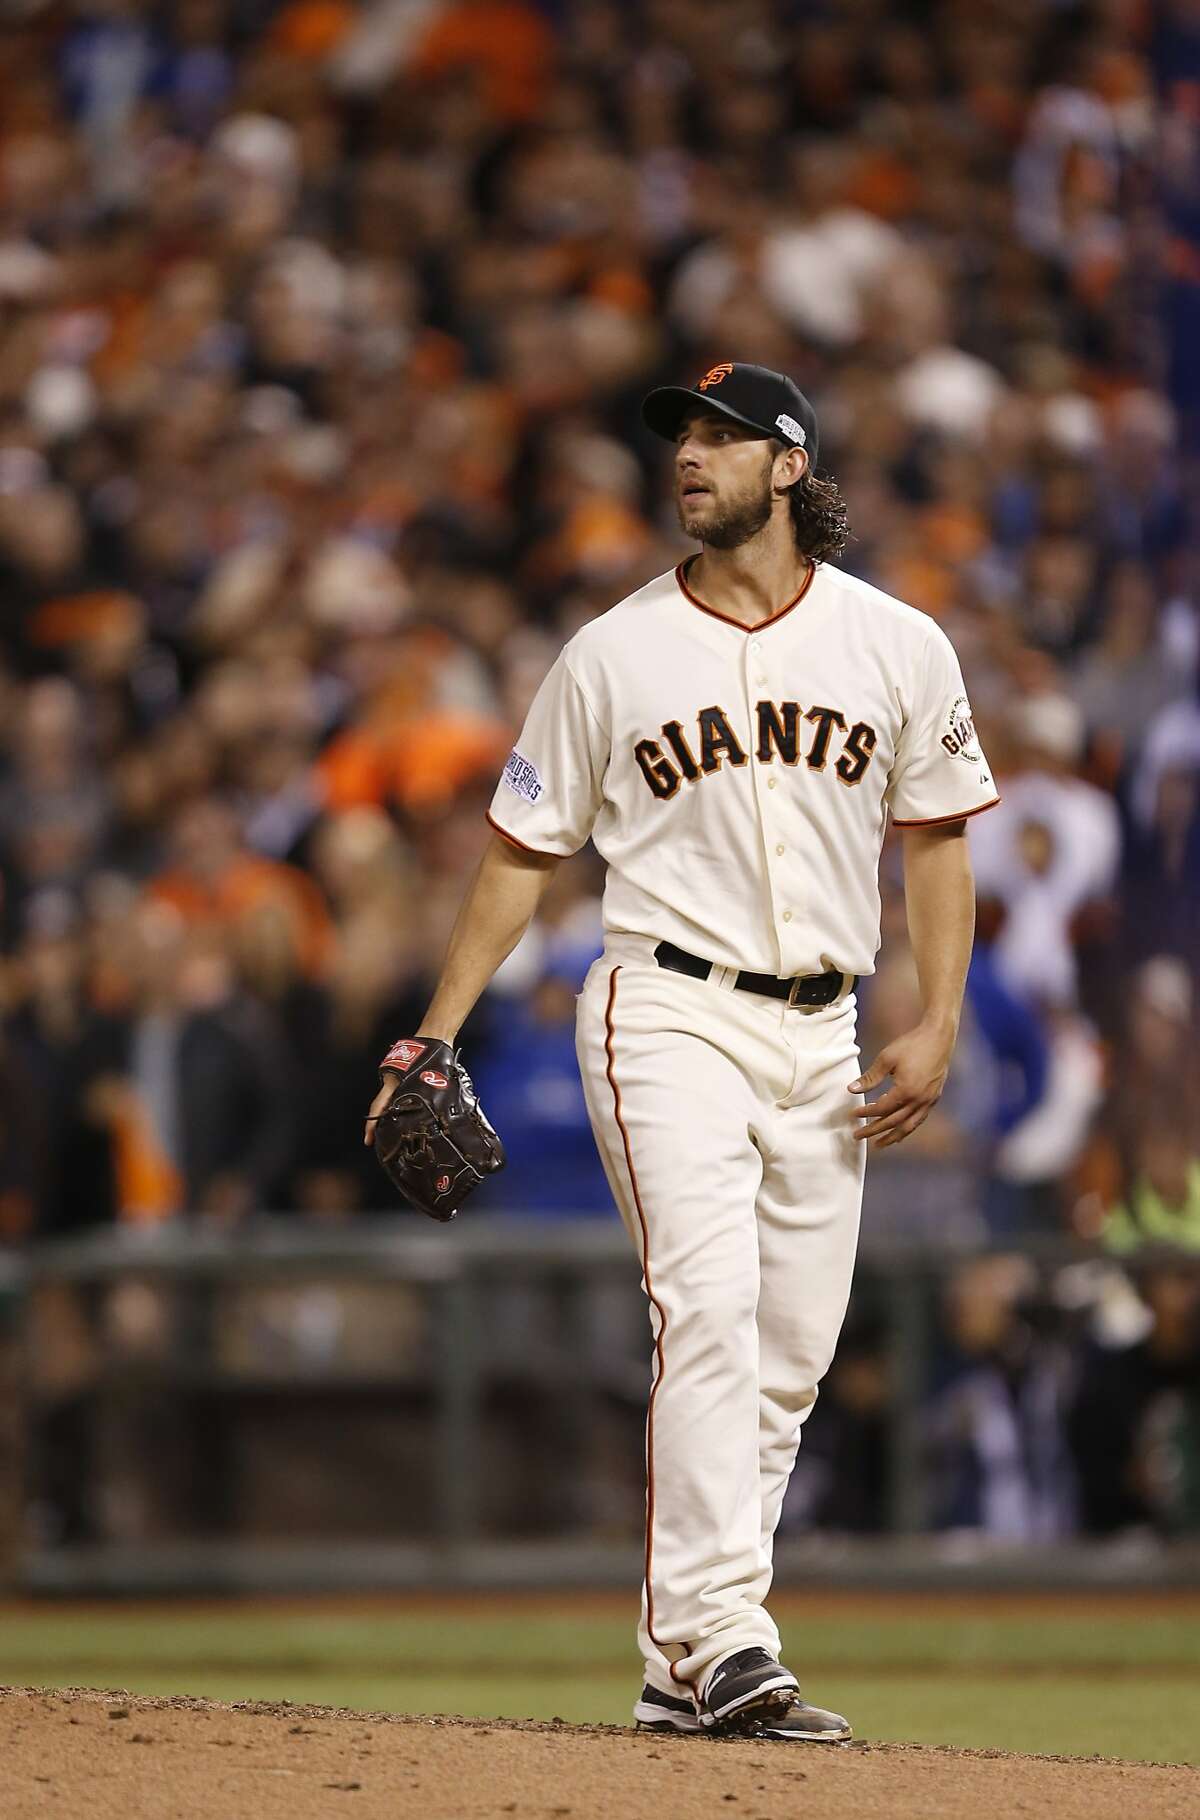 25-year-old Madison Bumgarner takes in magic of the moment